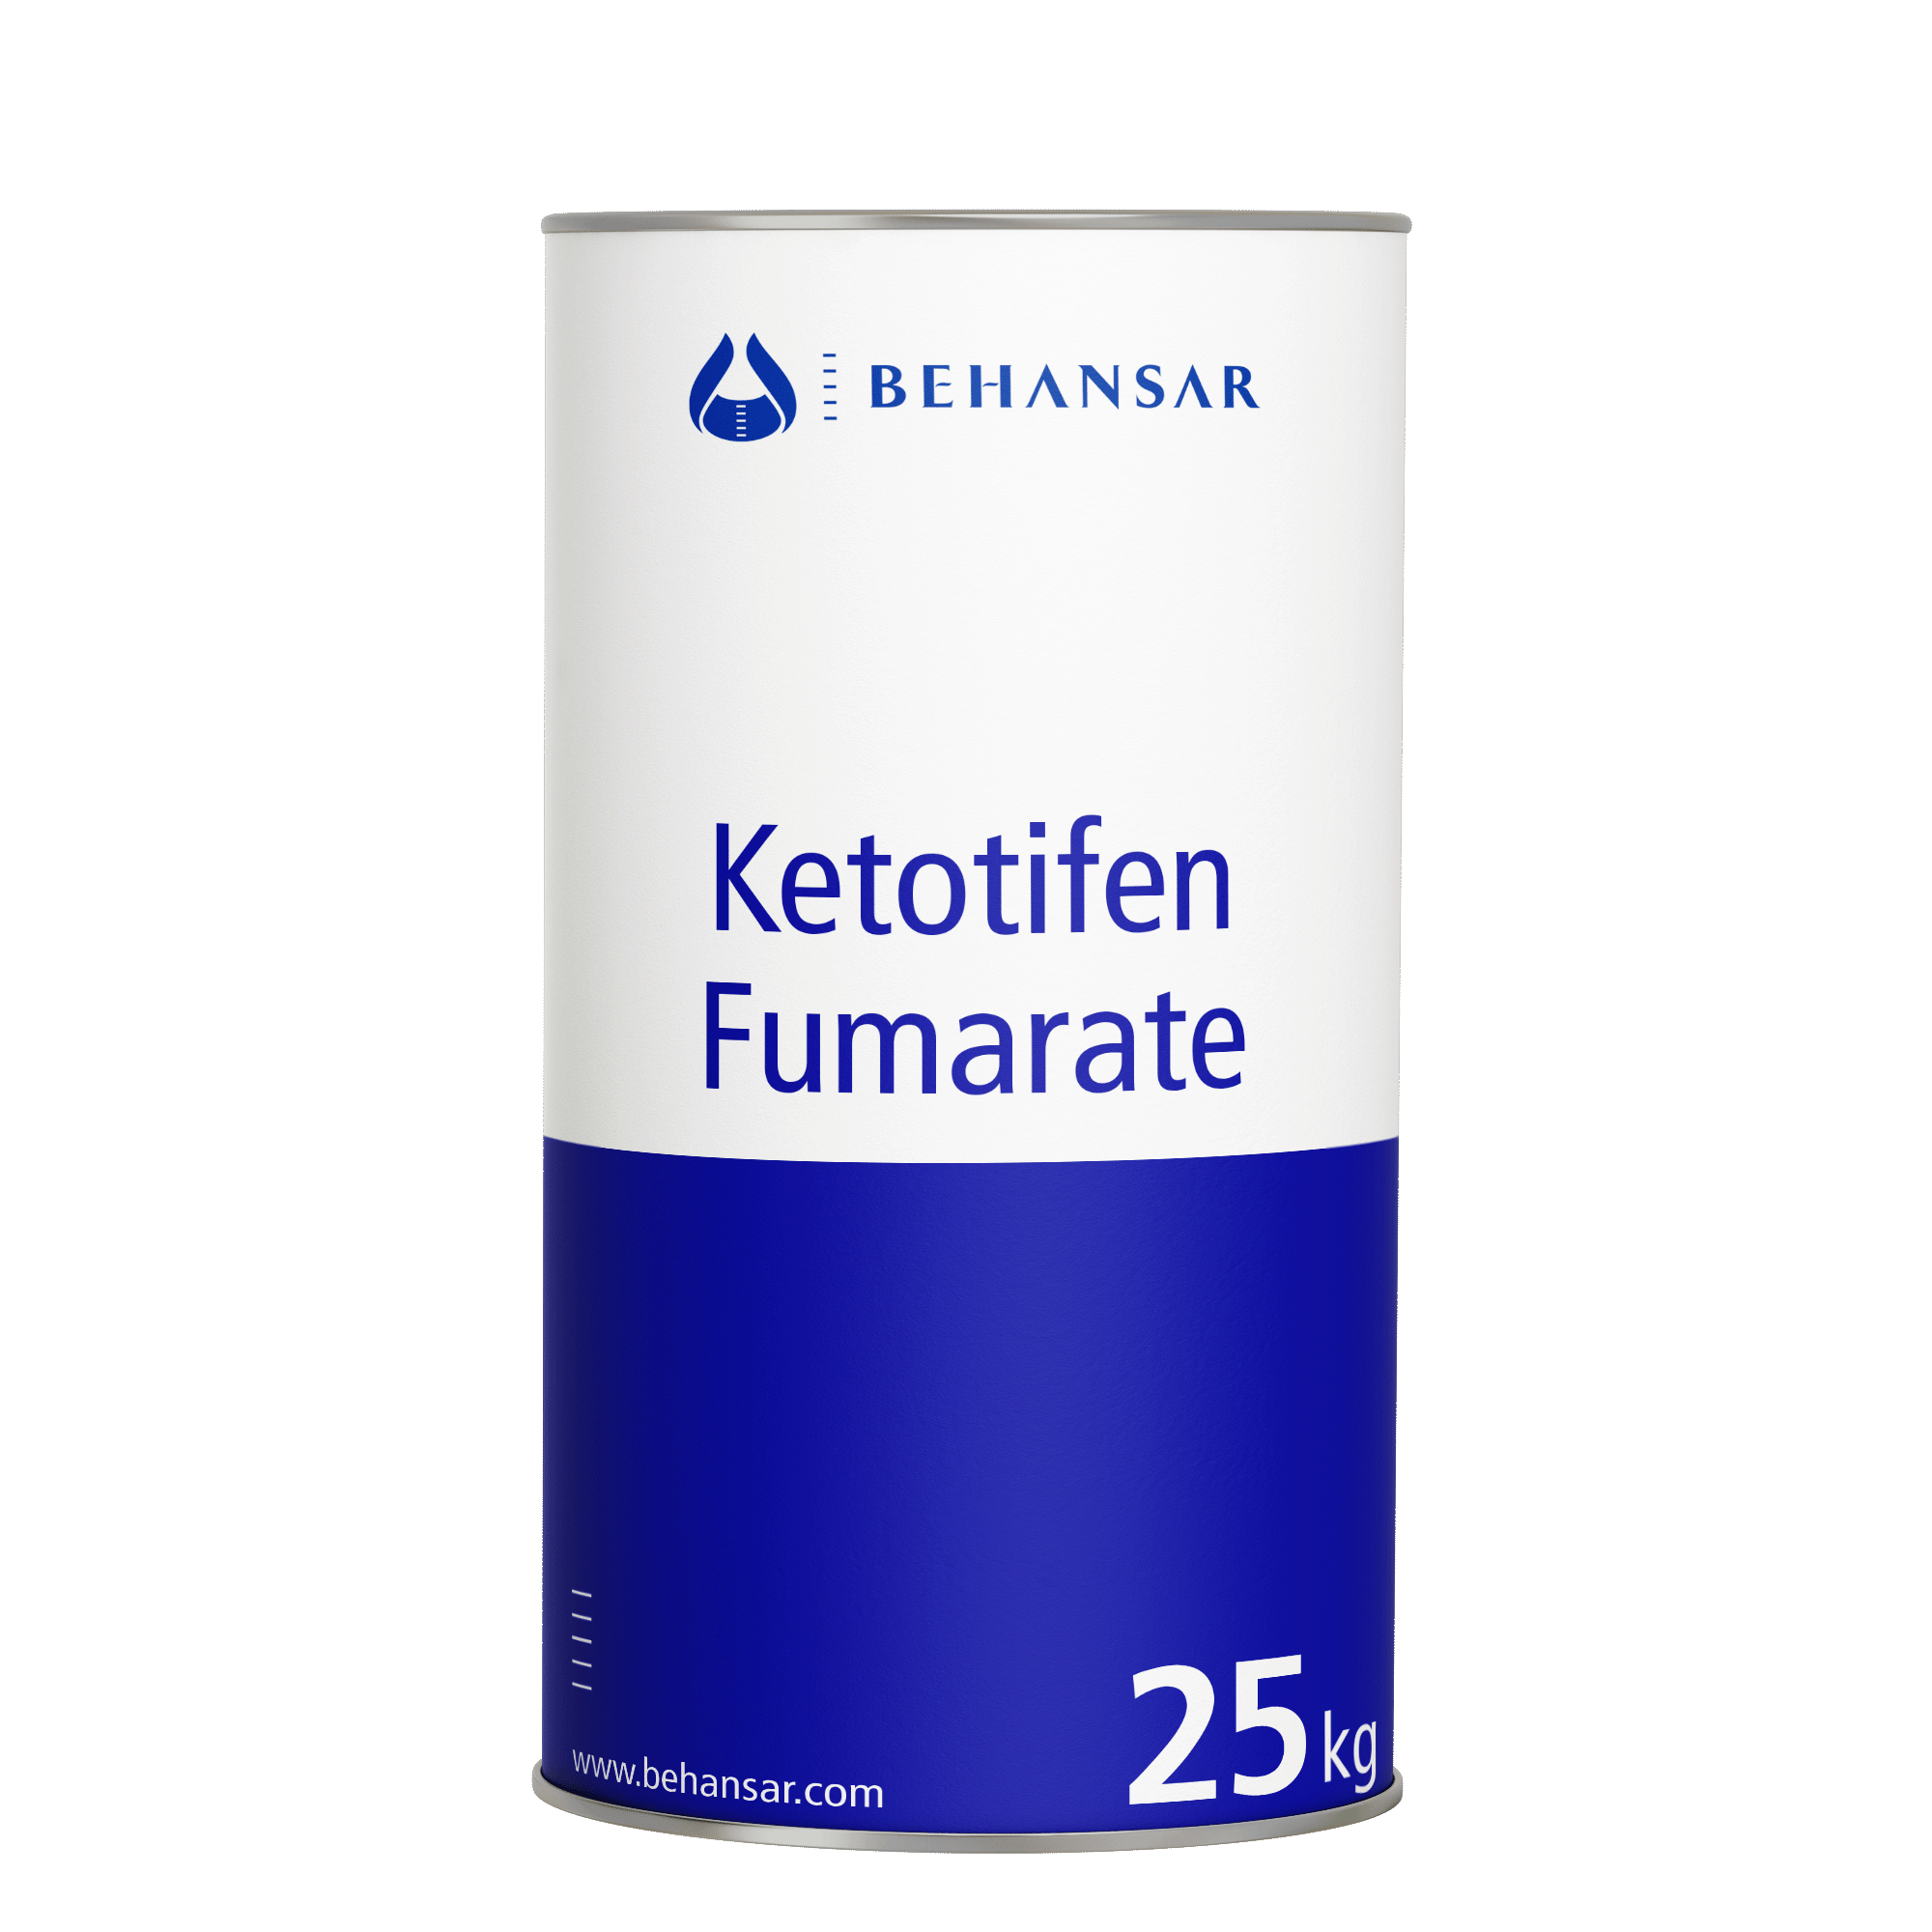 Ketotifen Fumarate is one of the products of Behansar Co